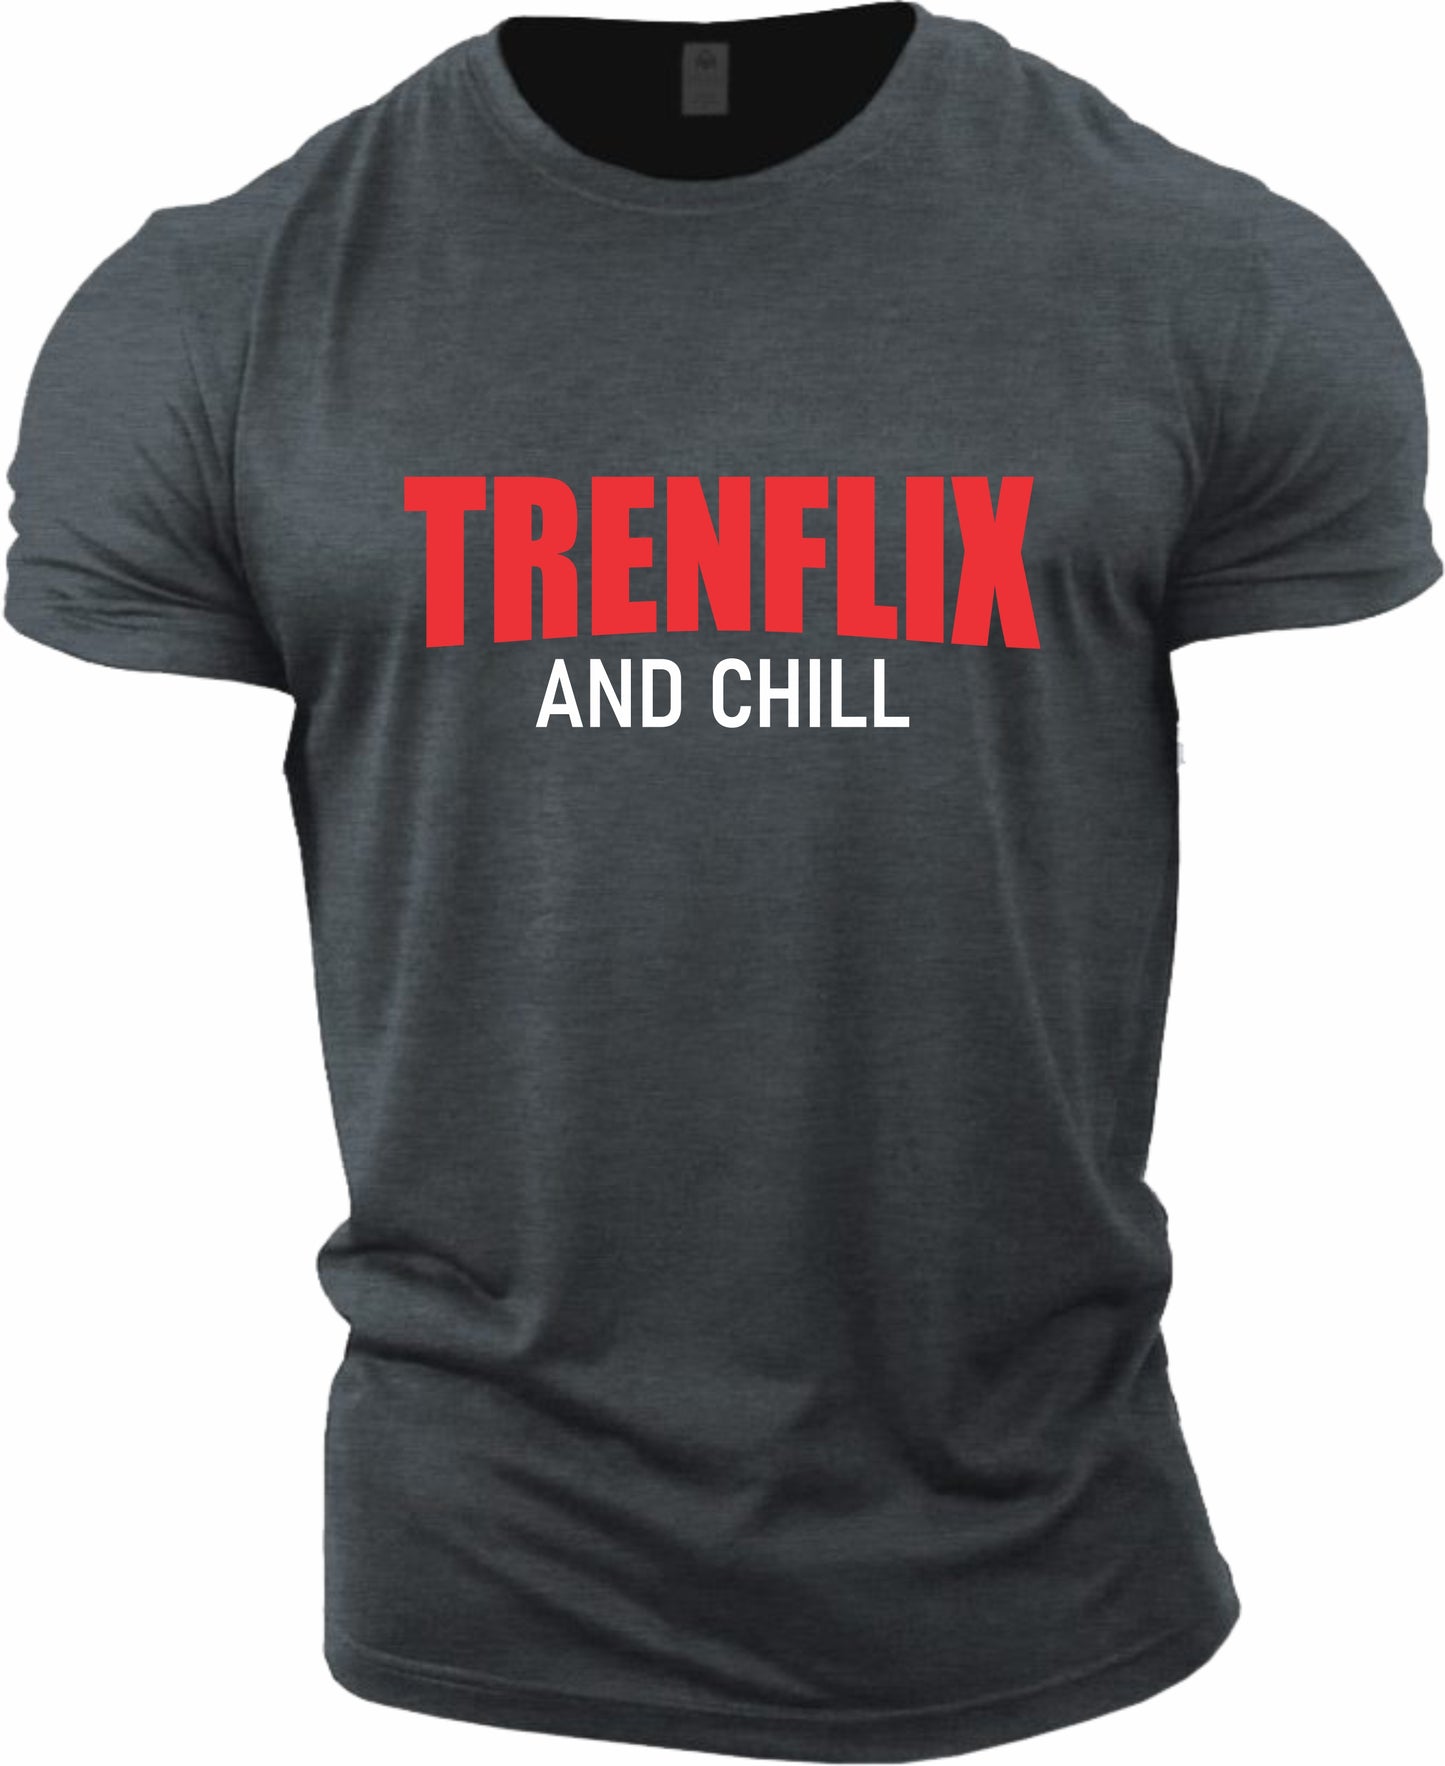 Gym T-shirt Trenflix and Chill